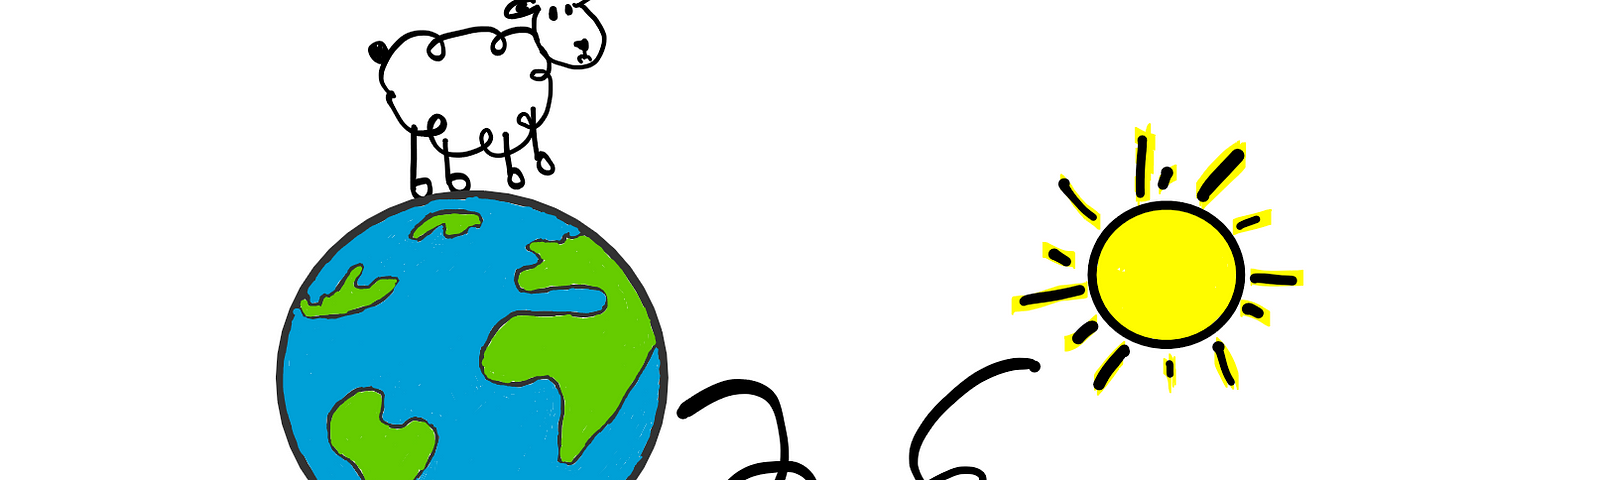 The Relationship Between Life, Stars, and Entropy — A funny-looking cartoon sheep standing on Earth (the sheep is disproportionately large compared to the earth), the sun on the right, and curly arrows somehow relating the earth and the sun to the word “entropy”